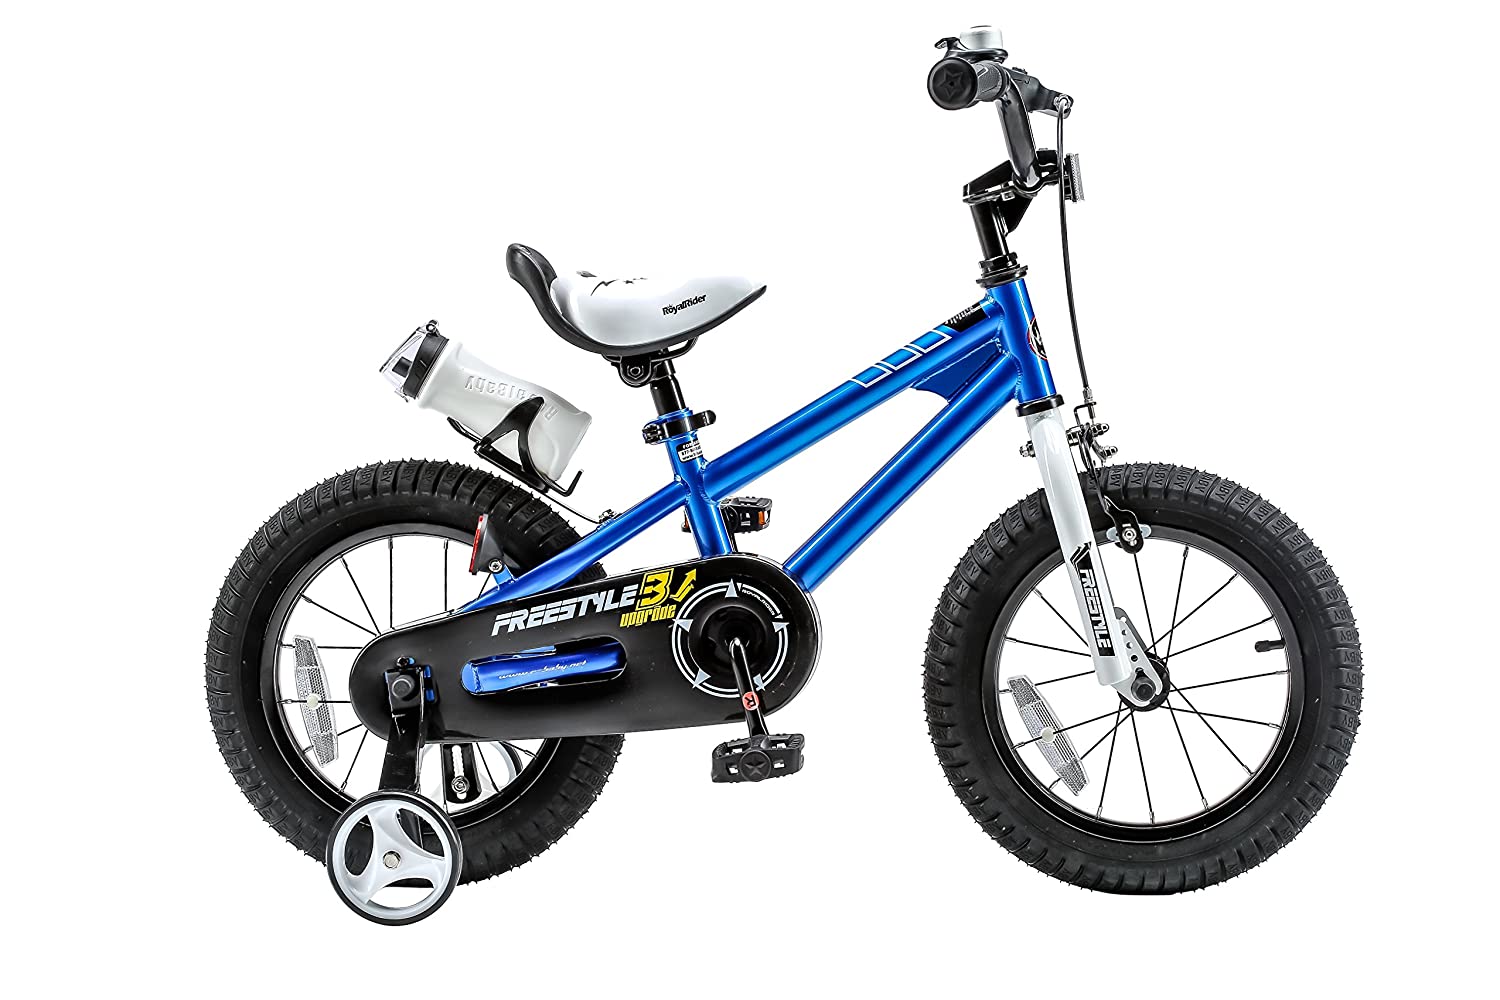 RoyalBaby Freestyle Kid’s Bike for Boys and Girls, 12 14 16 inch with Training Wheels, 16 18 20 inch with Kickstand, in Multiple Colors